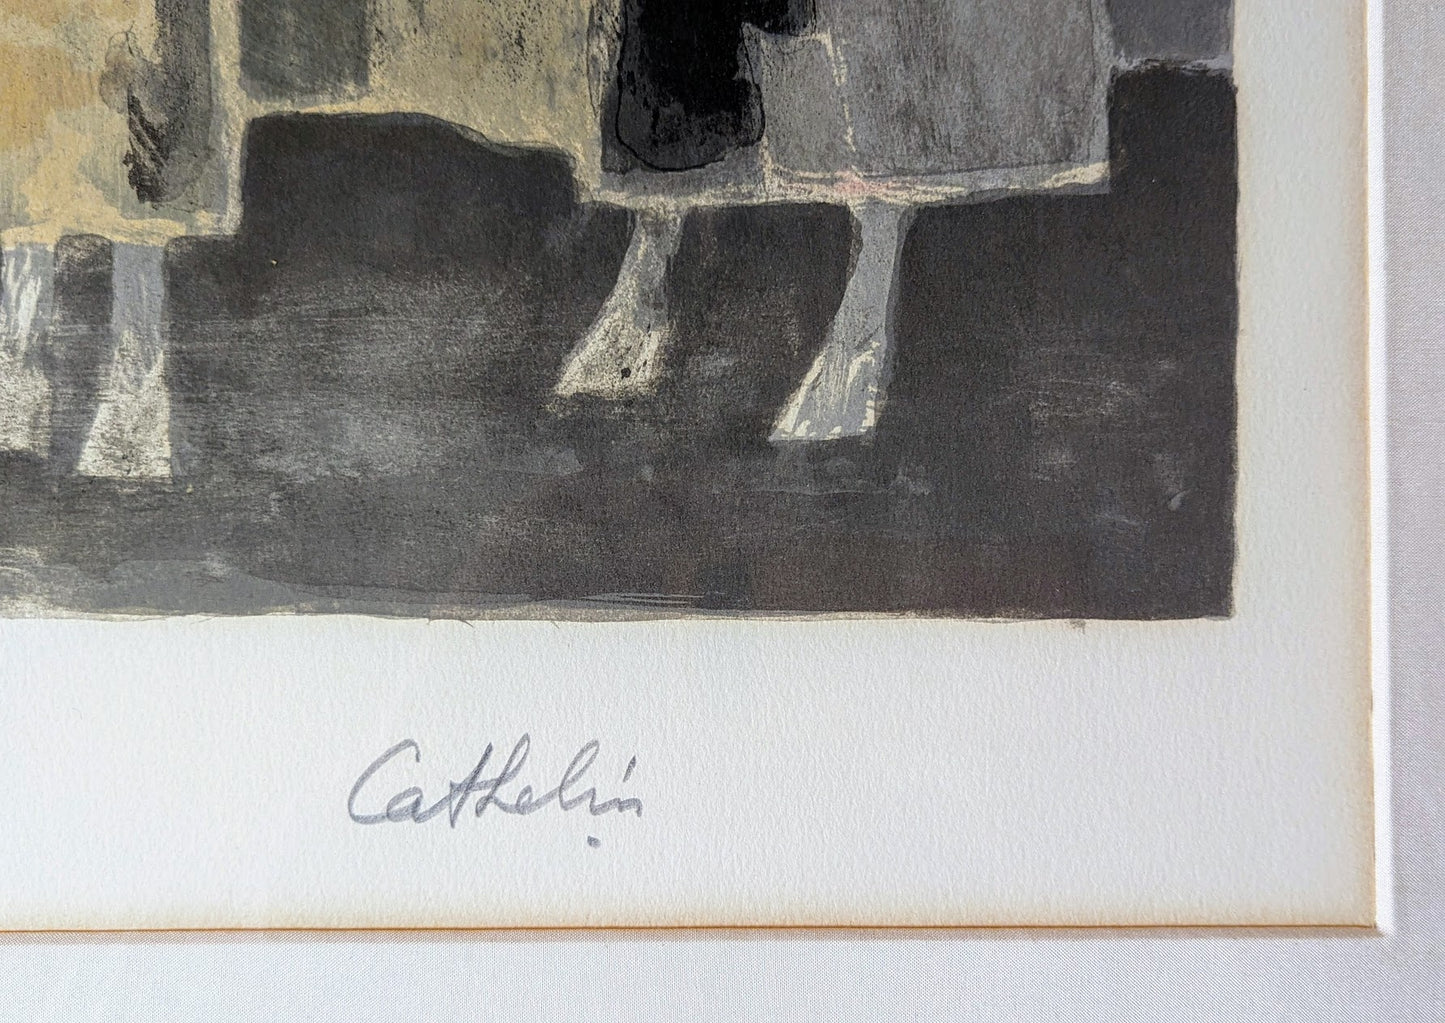 RARE Bernard Cathelin Lithograph | Signed & Numbered (31/125)